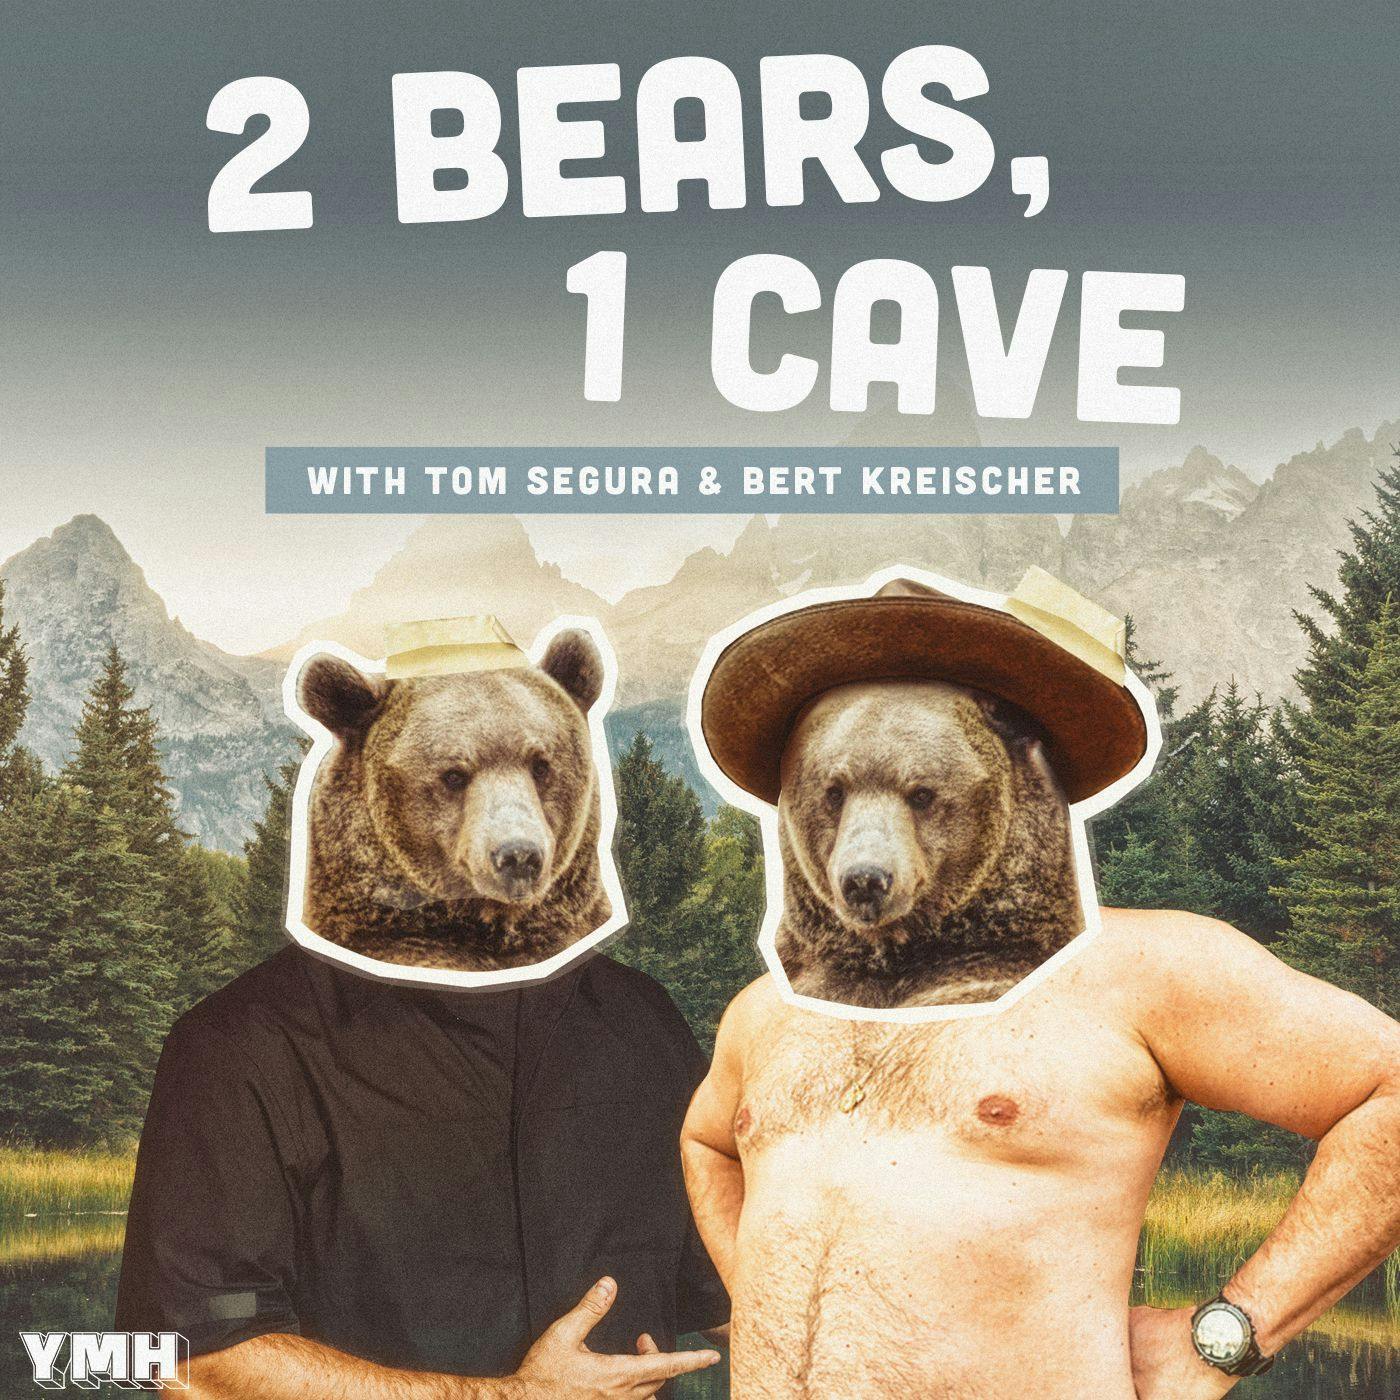 Our Big Announcement | 2 Bears, 1 Cave